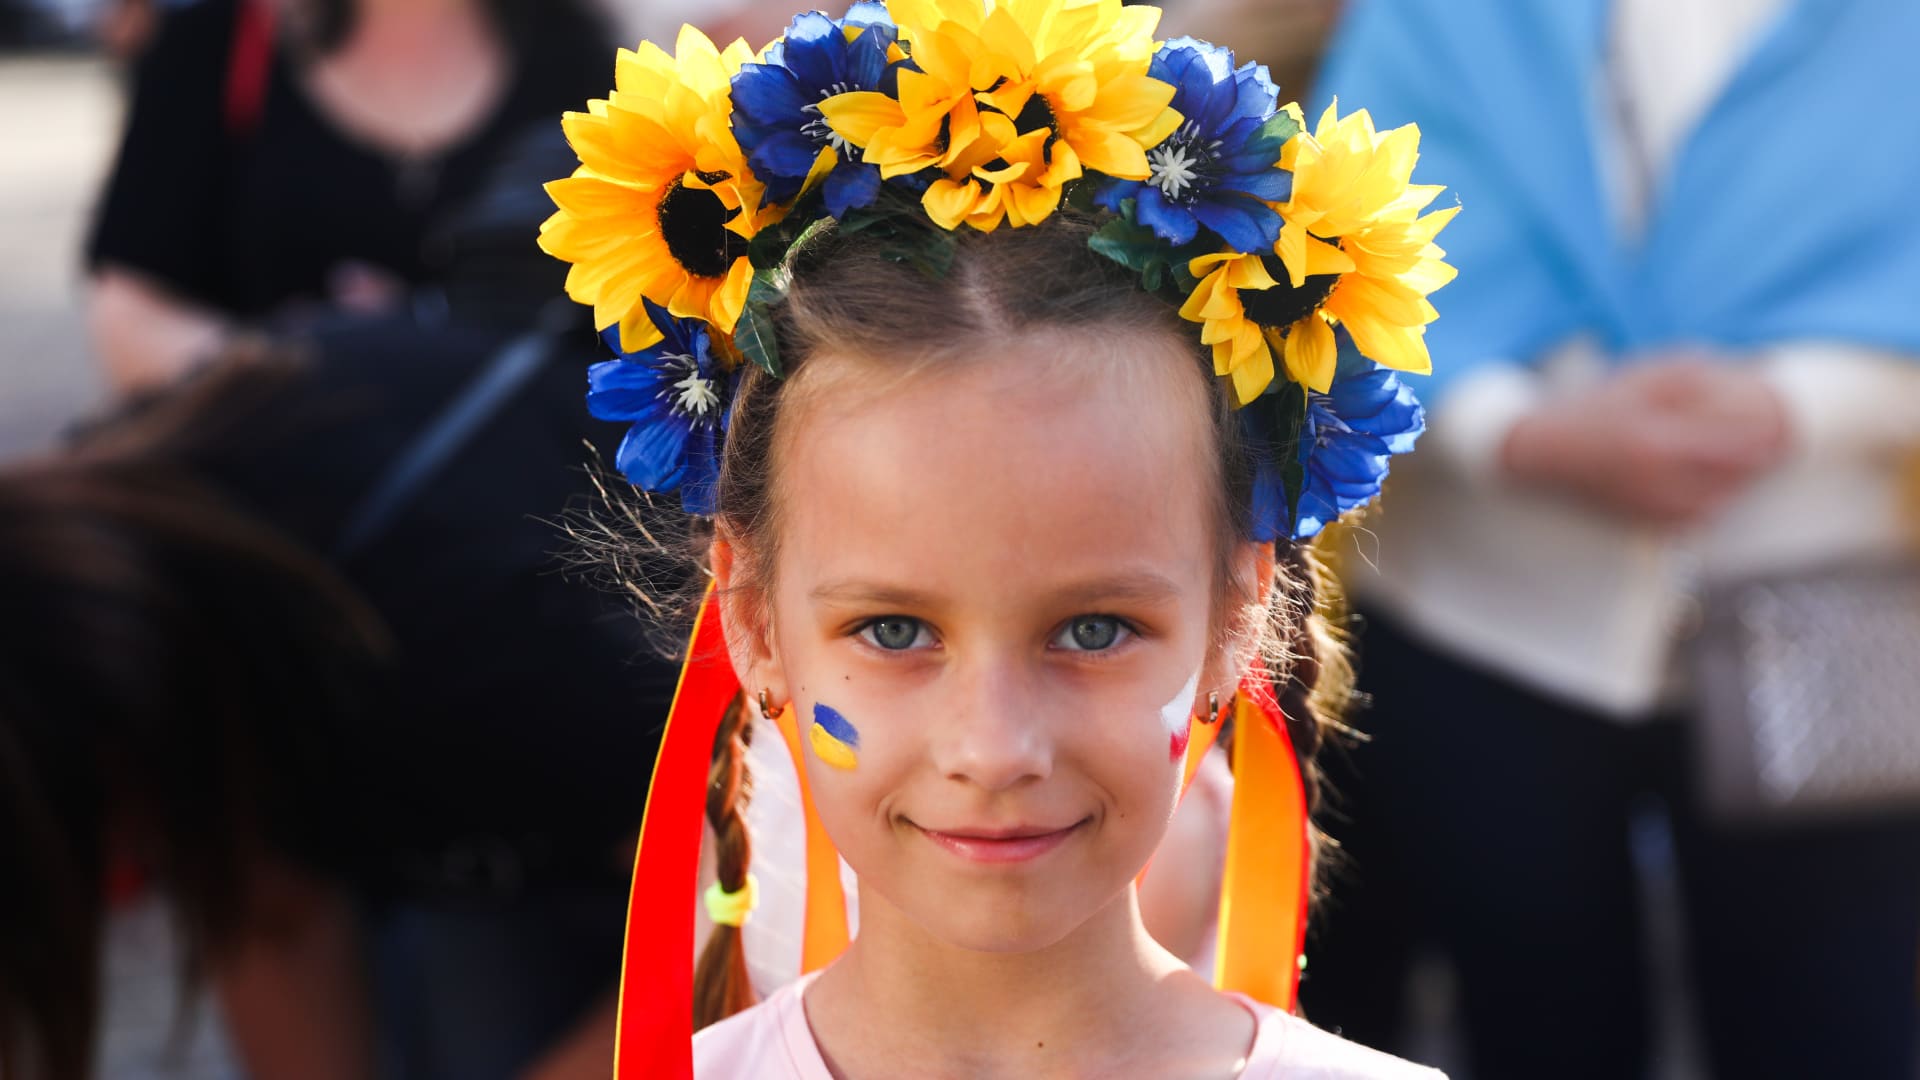 A young girl is seen during celebration of Vyshyvanka Day in Krakow, Poland on May 19th, 2022.